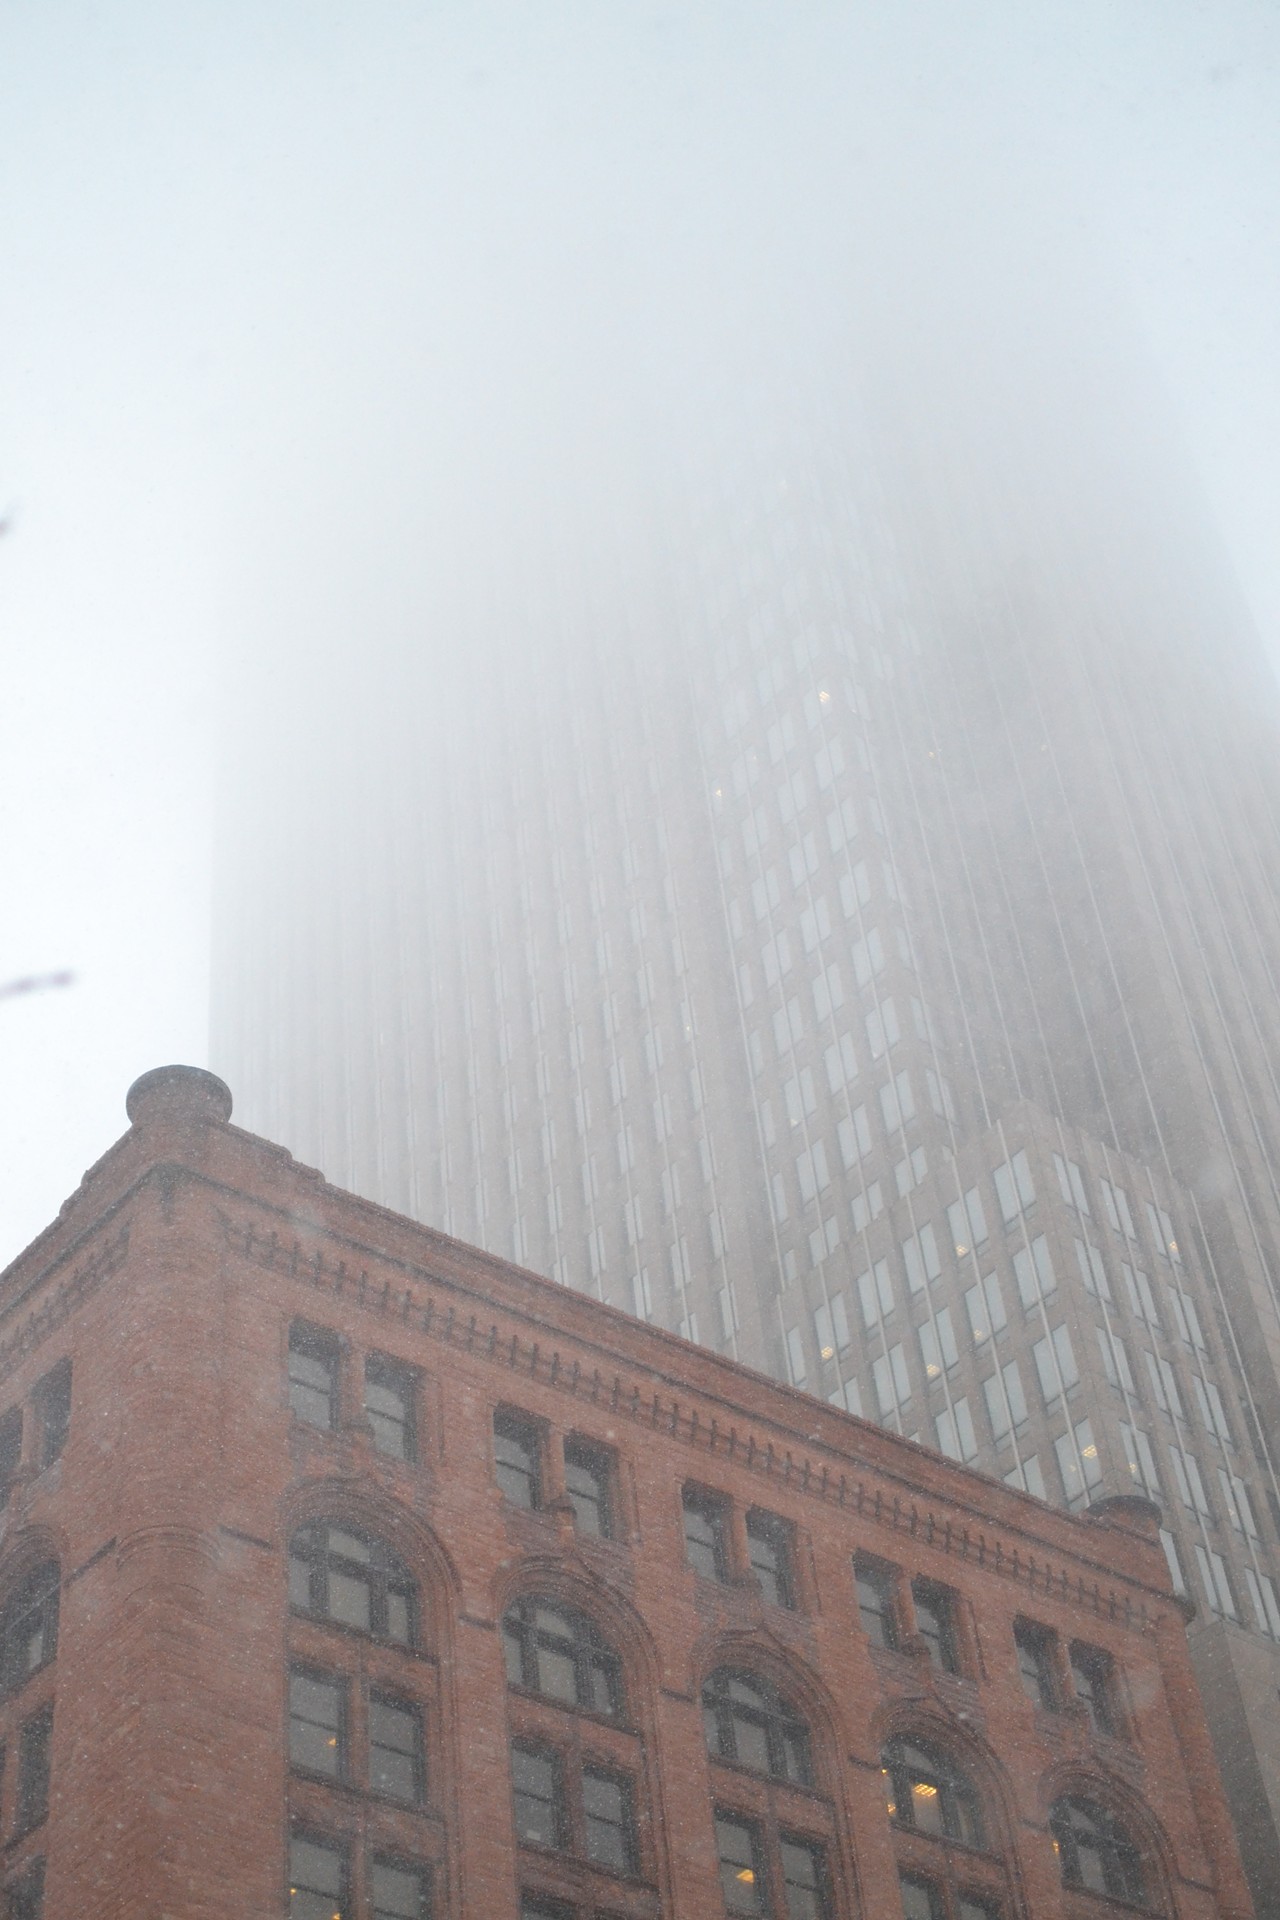 Scenes From A Mid-March Snowstorm: Downtown Cleveland on Wednesday Afternoon